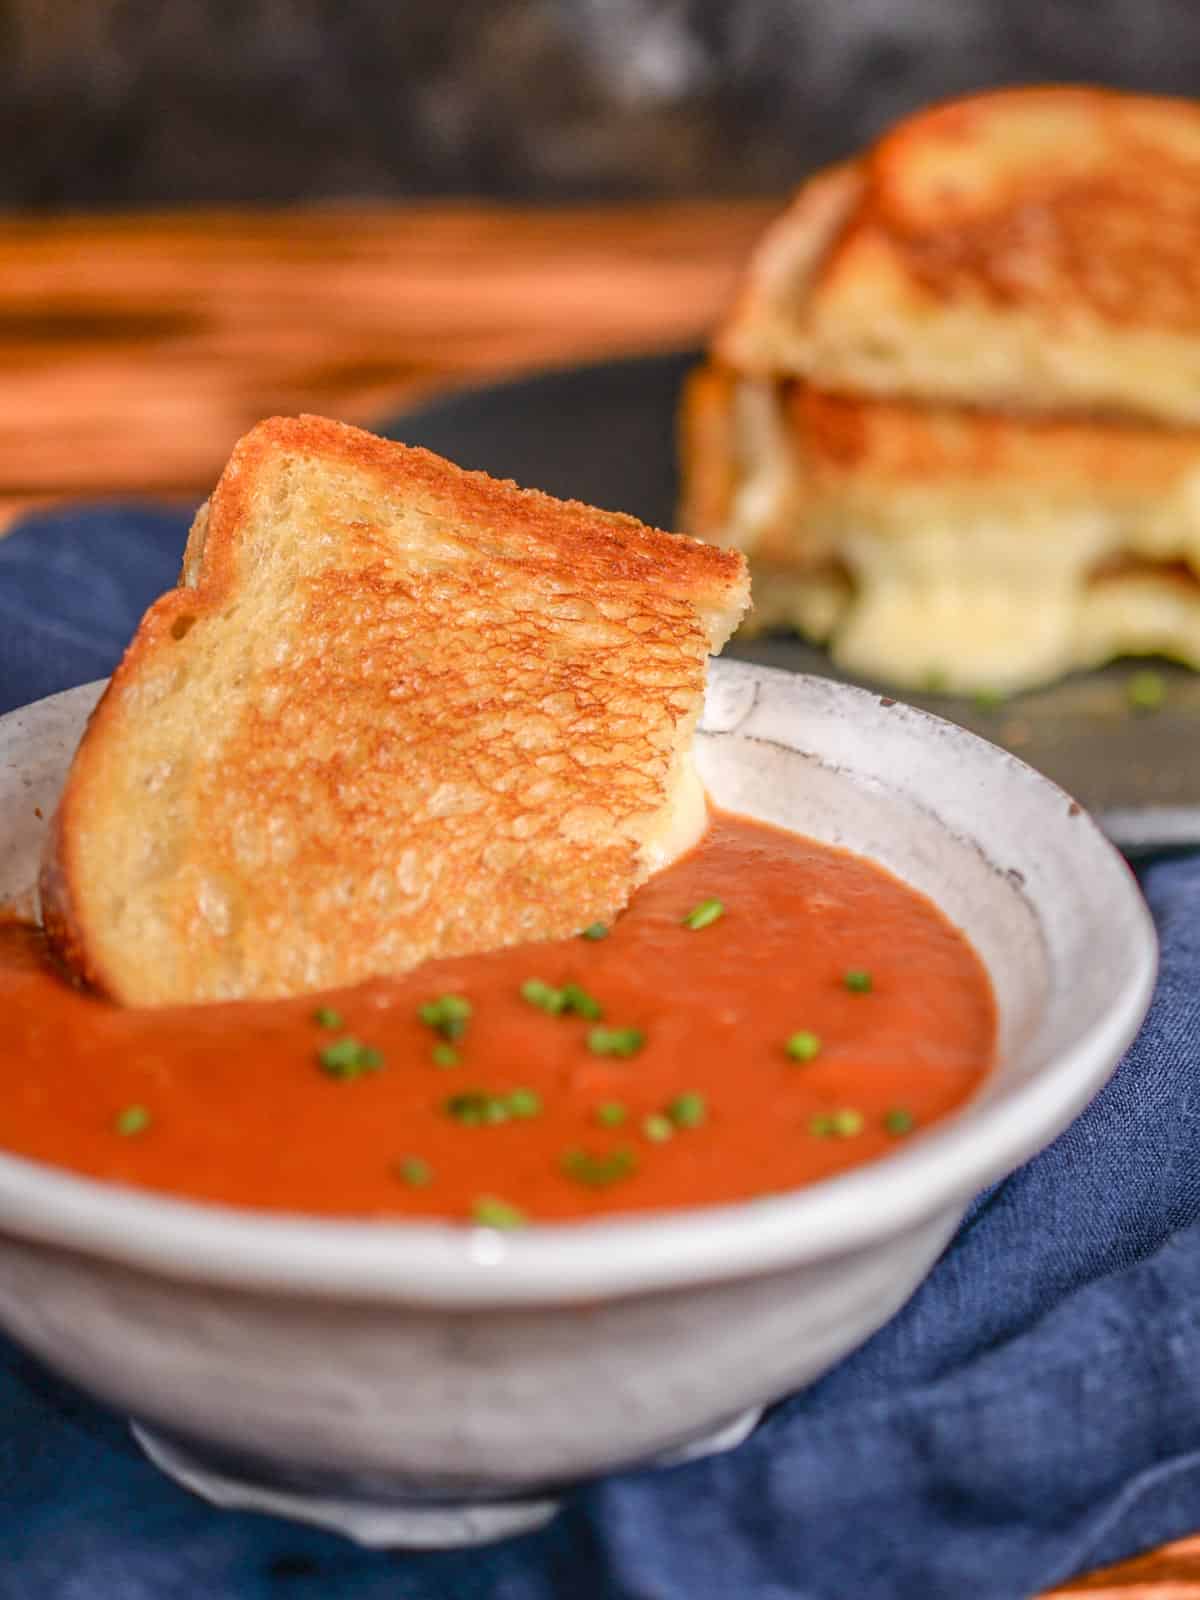 PS Seasoning 8 oz. Grilled Cheese Tomato Soup Mix